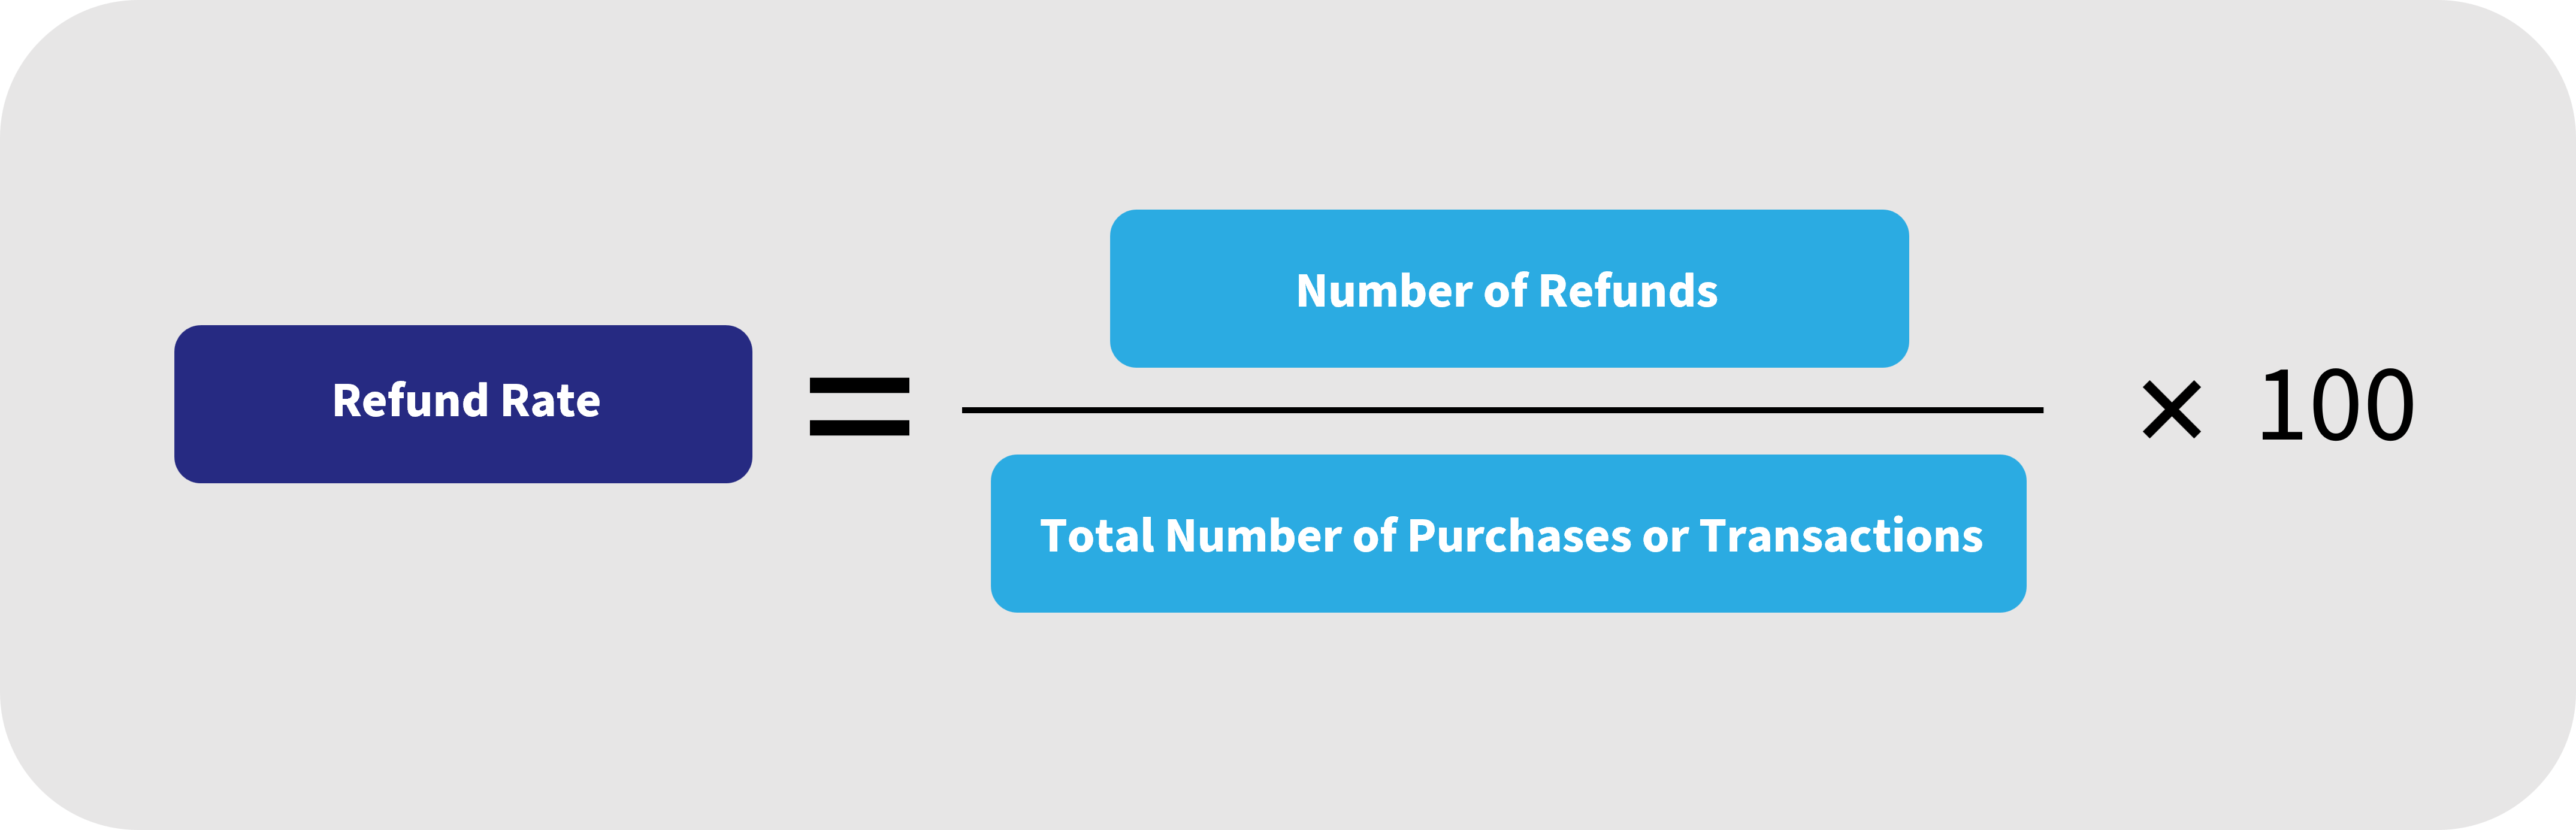 Refund rate = (Number of Refunds / Total Number of Purchases or Transactions) * 100